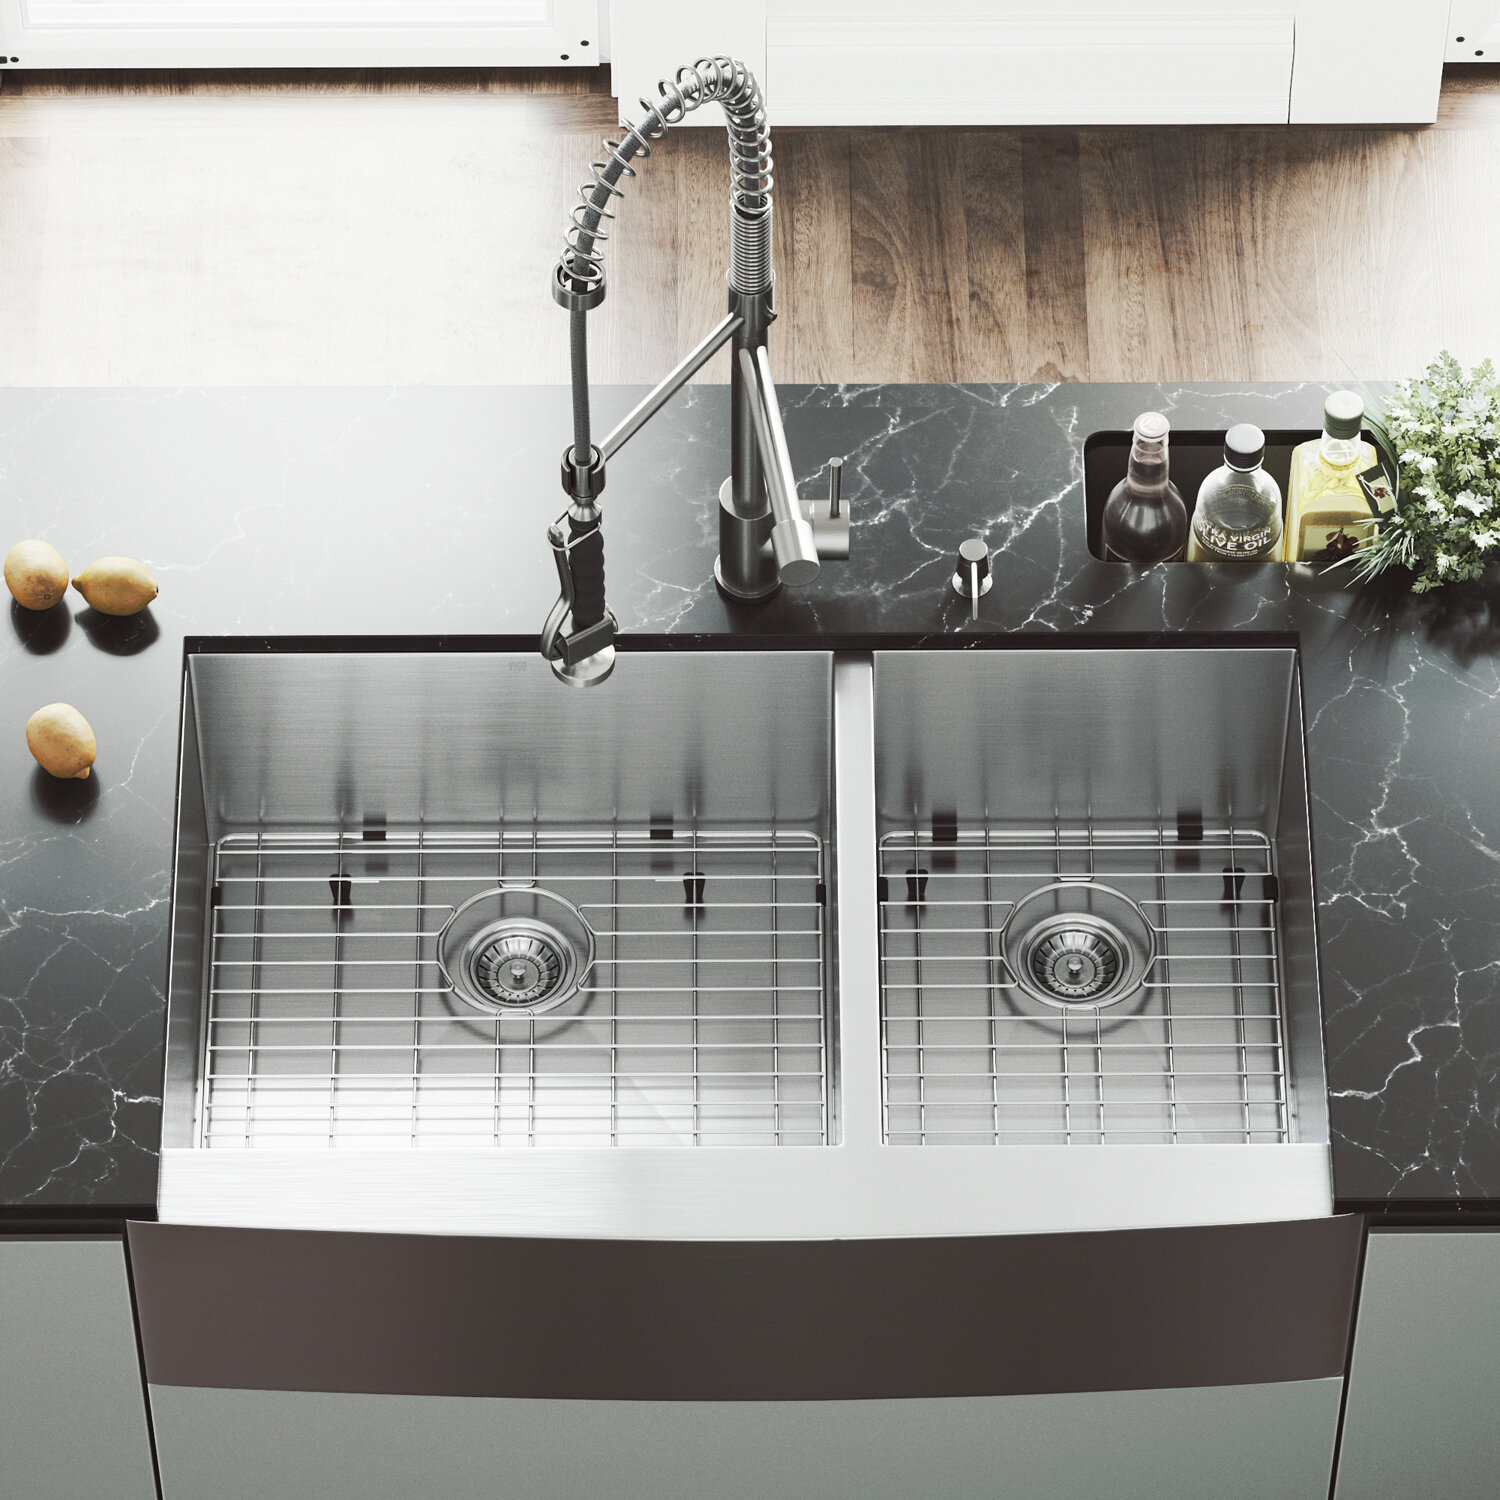 36 L X 22 W Double Basin Farmhouse Kitchen Sink With Zurich Faucet Two Grids Two Strainers And Soap Dispenser